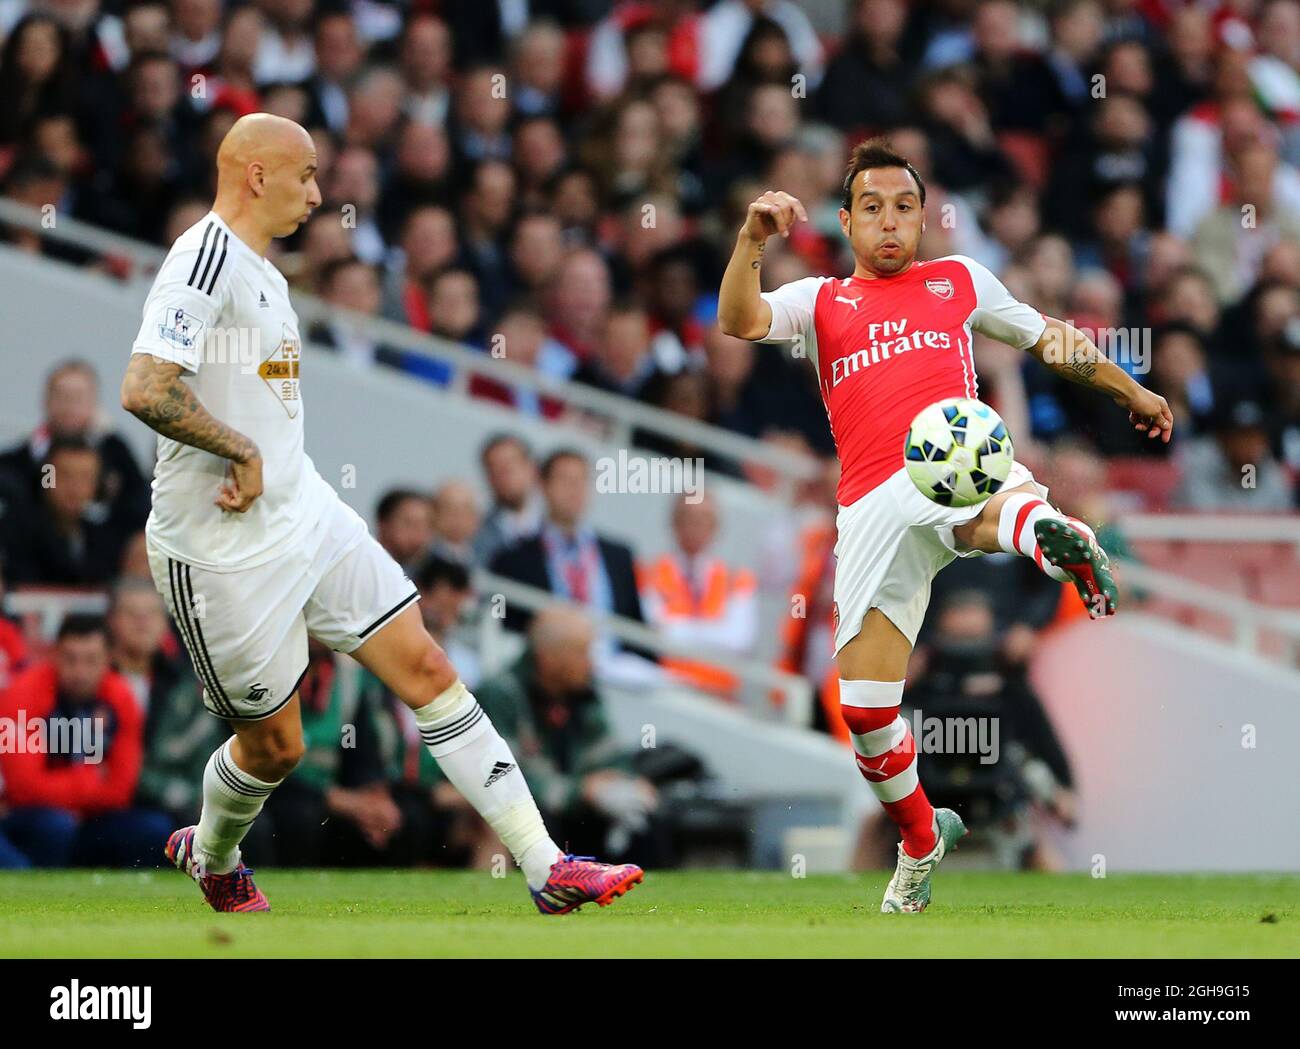 Arsenal's Santi Cazorla tussles with Swansea's Jonjo Shelvey during the Barclays Premier League match between Arsenal and Swansea City at the Emirates Stadium in England on 11th May 2015. Stock Photo